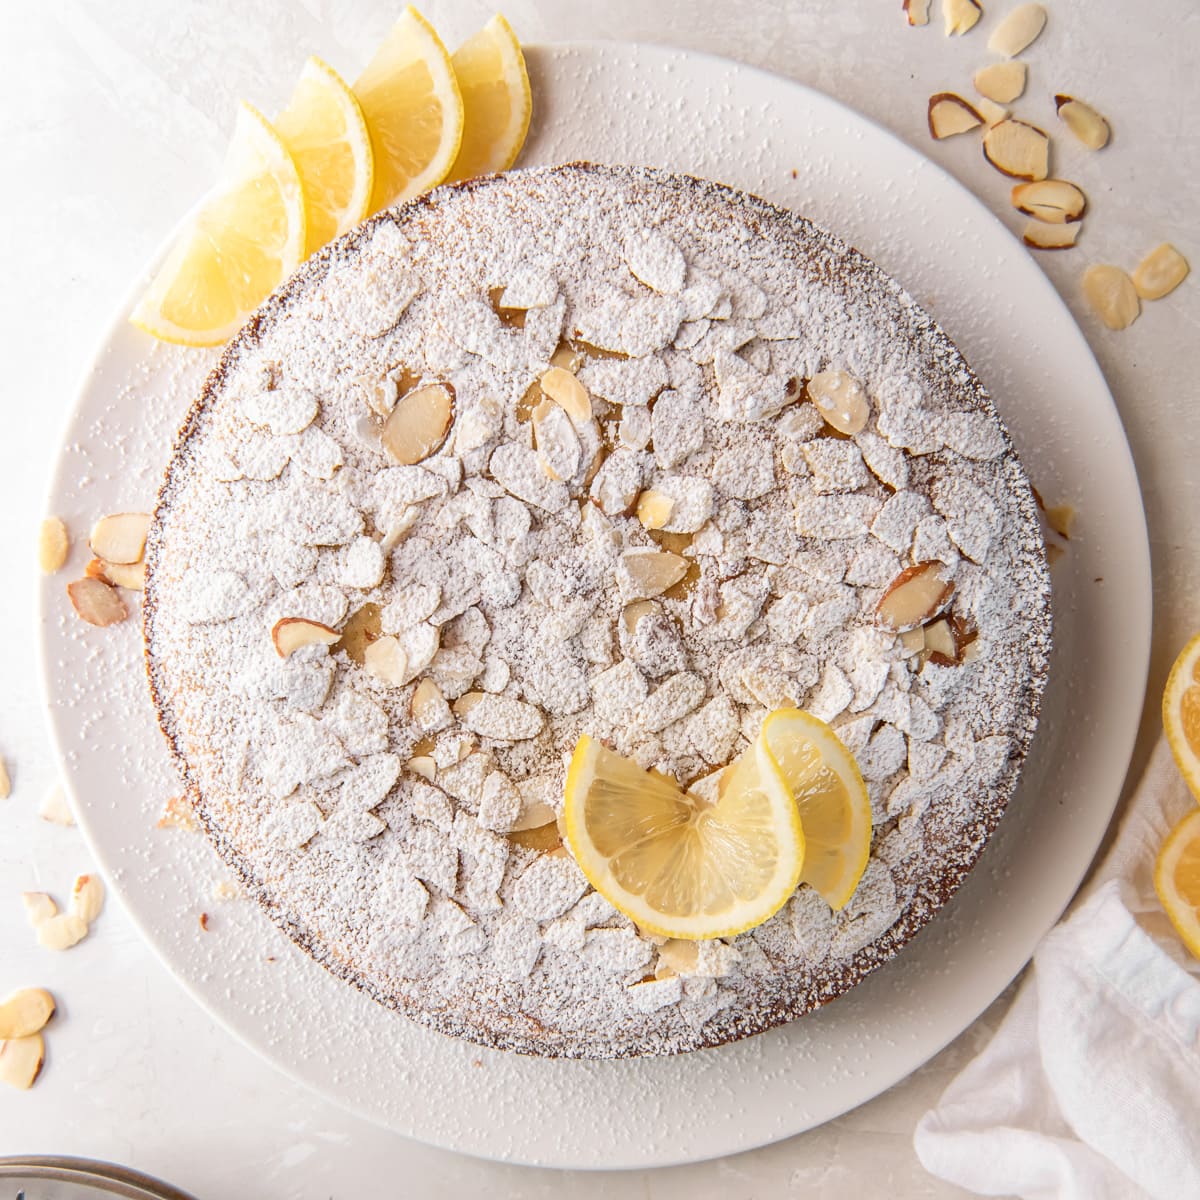 lemon ricotta cake topped with sliced almonds and confectioners sugar.